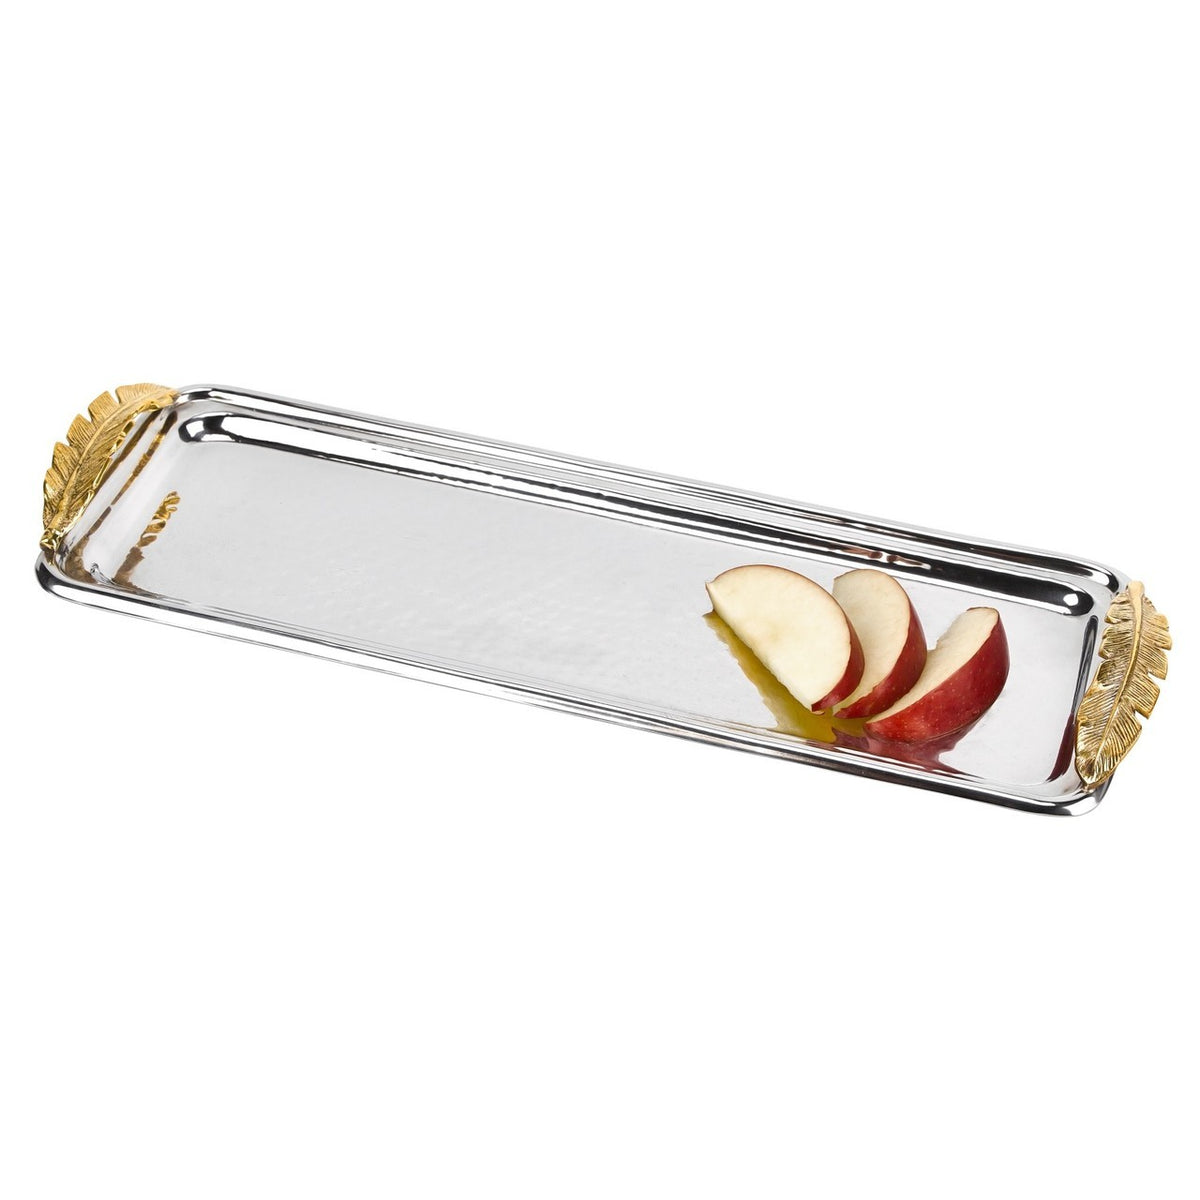 Feathers Stainless Steel Rectangular Serving Tray